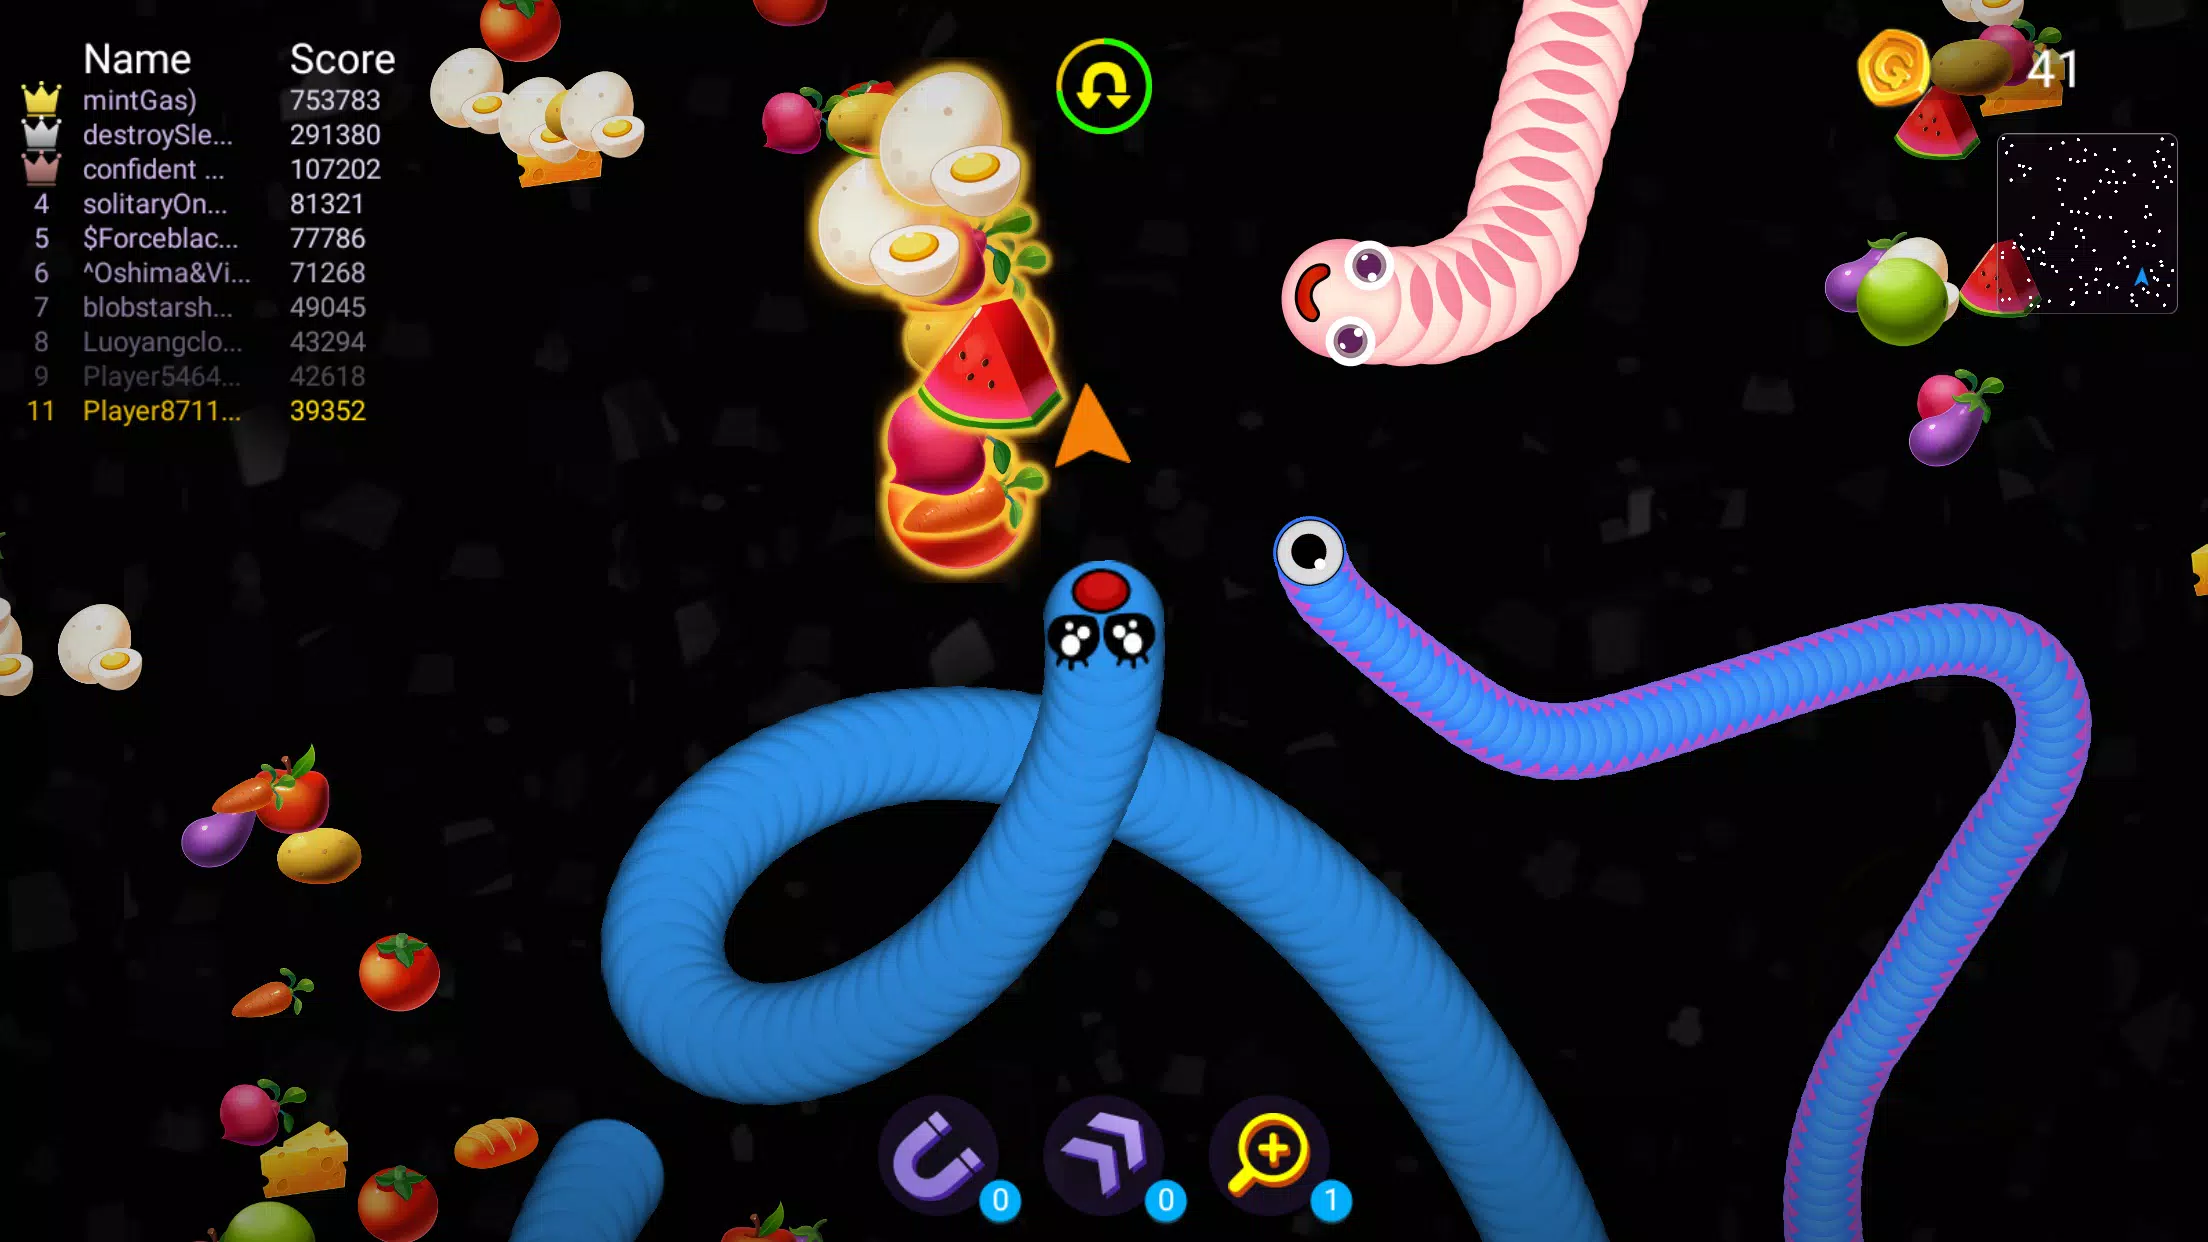 Slink.io - Snake Games - Apps on Google Play